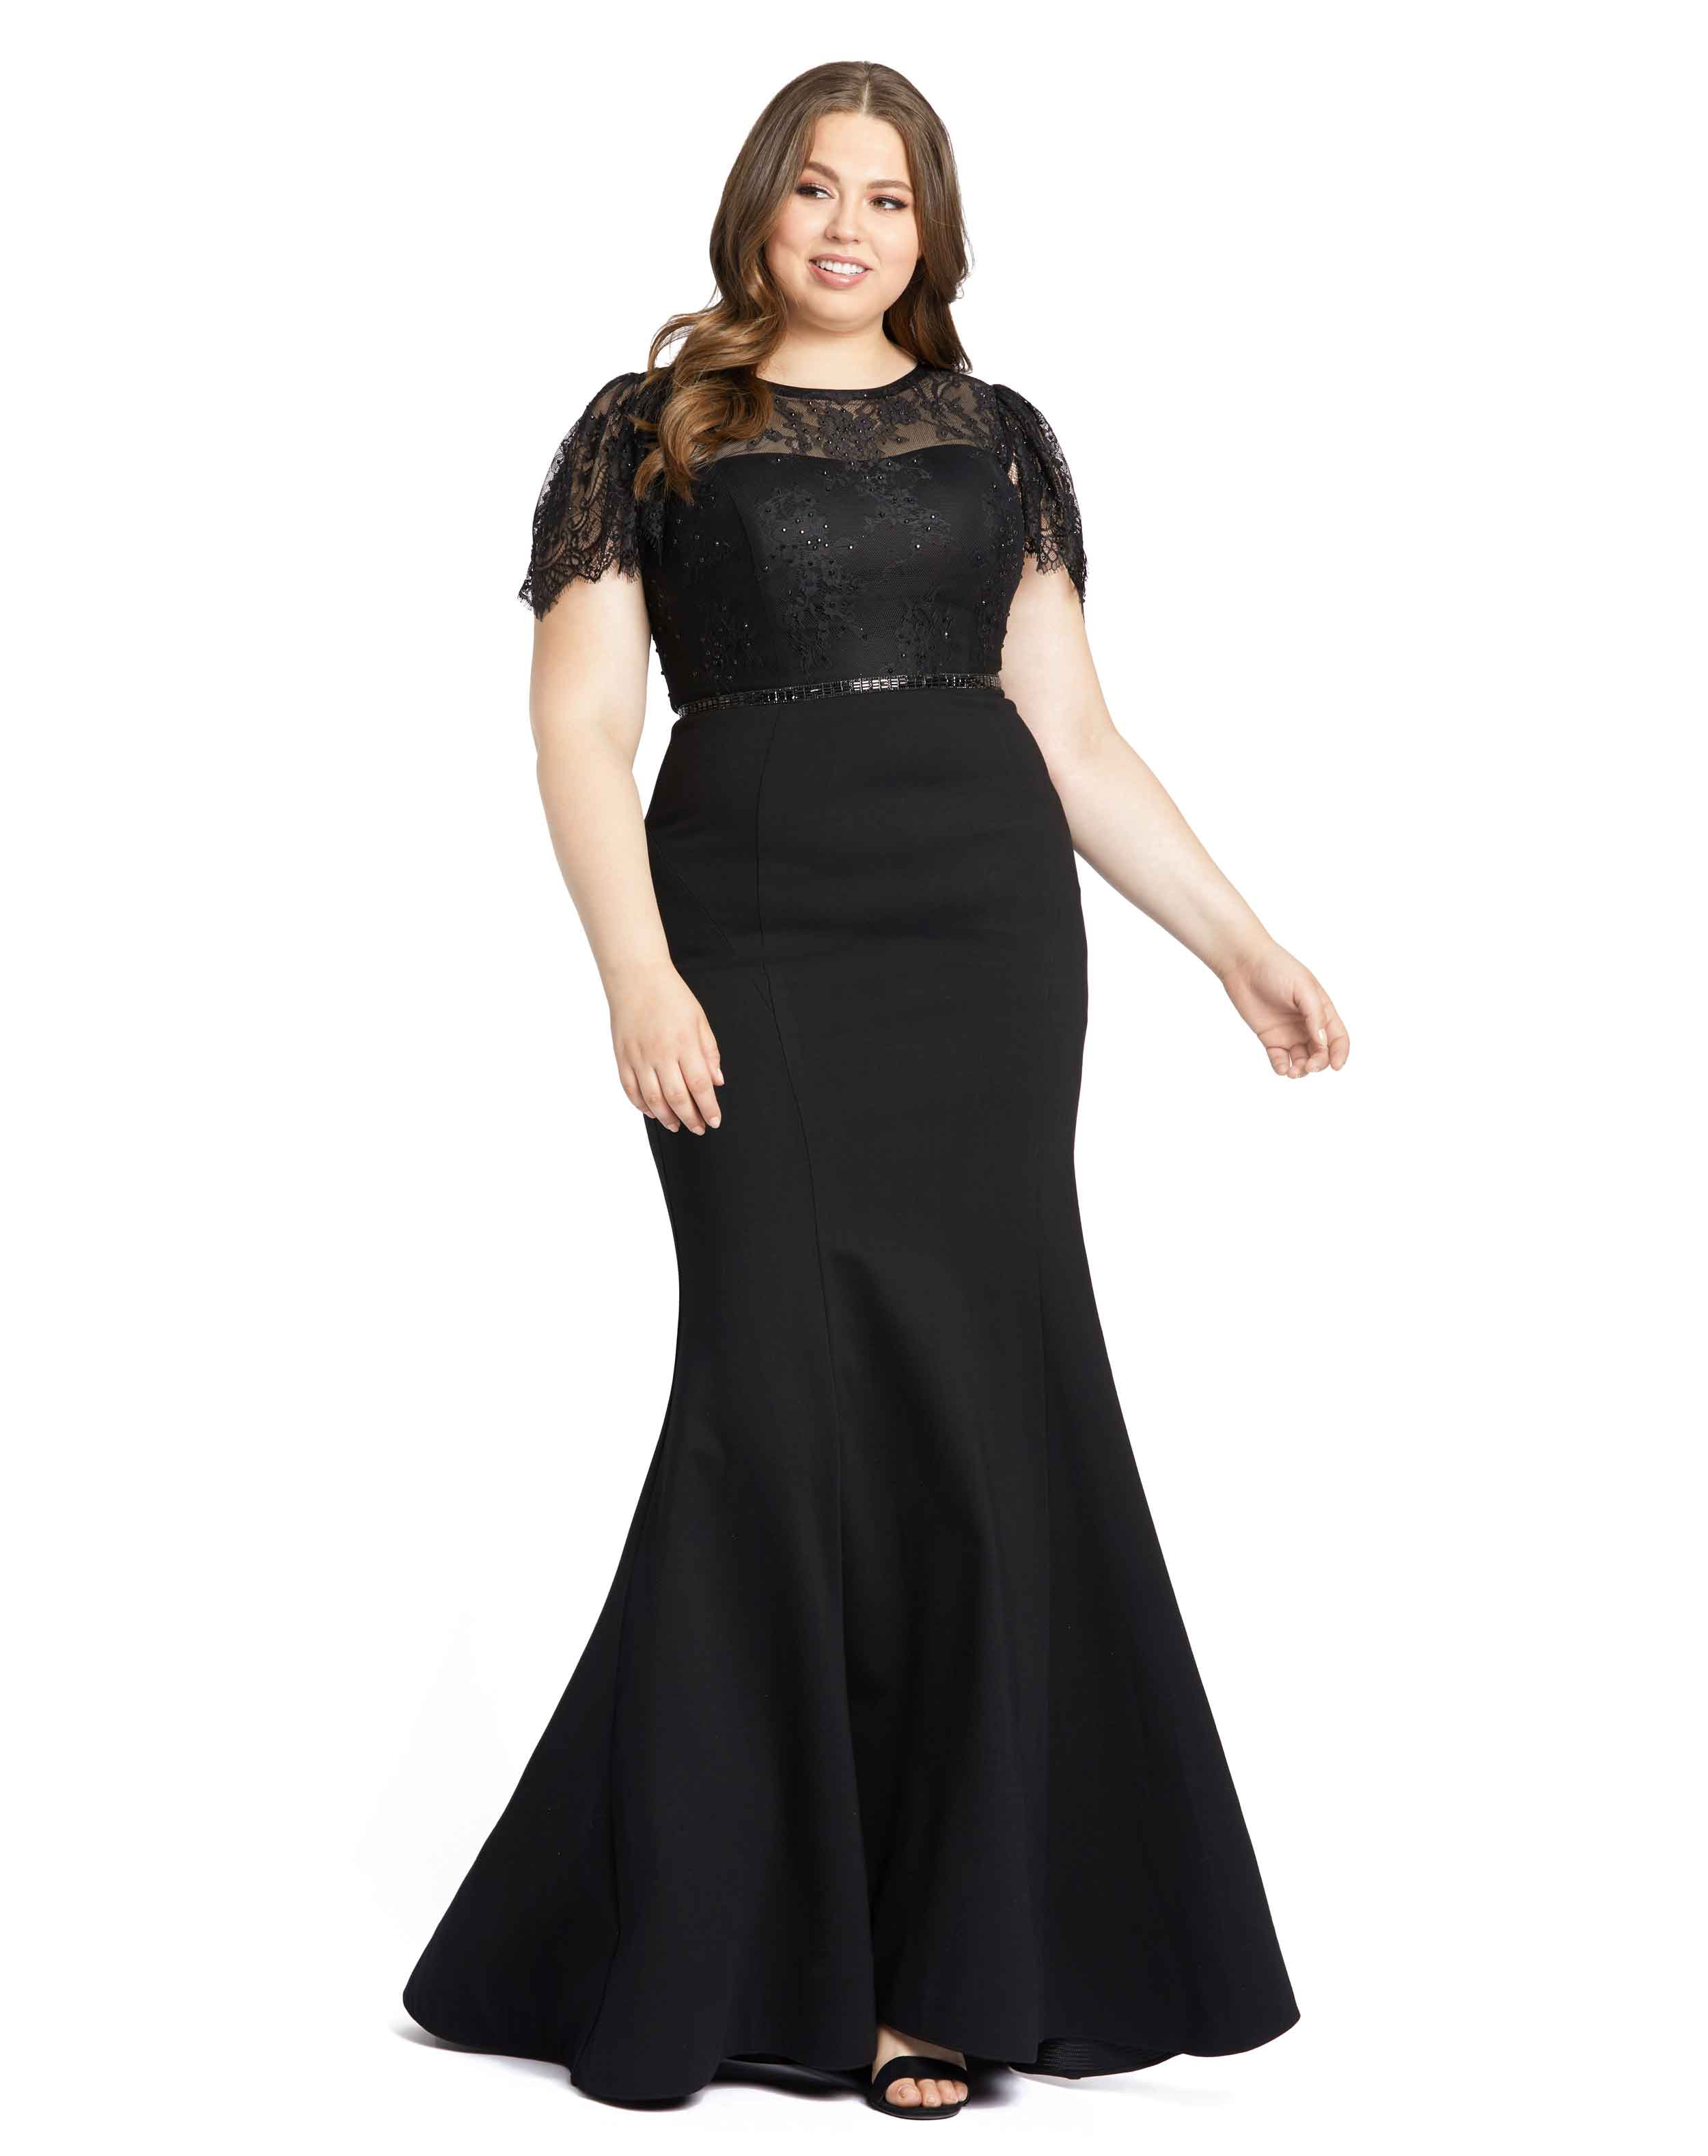 Lace Illusion High Neck Cap Sleeve Gown